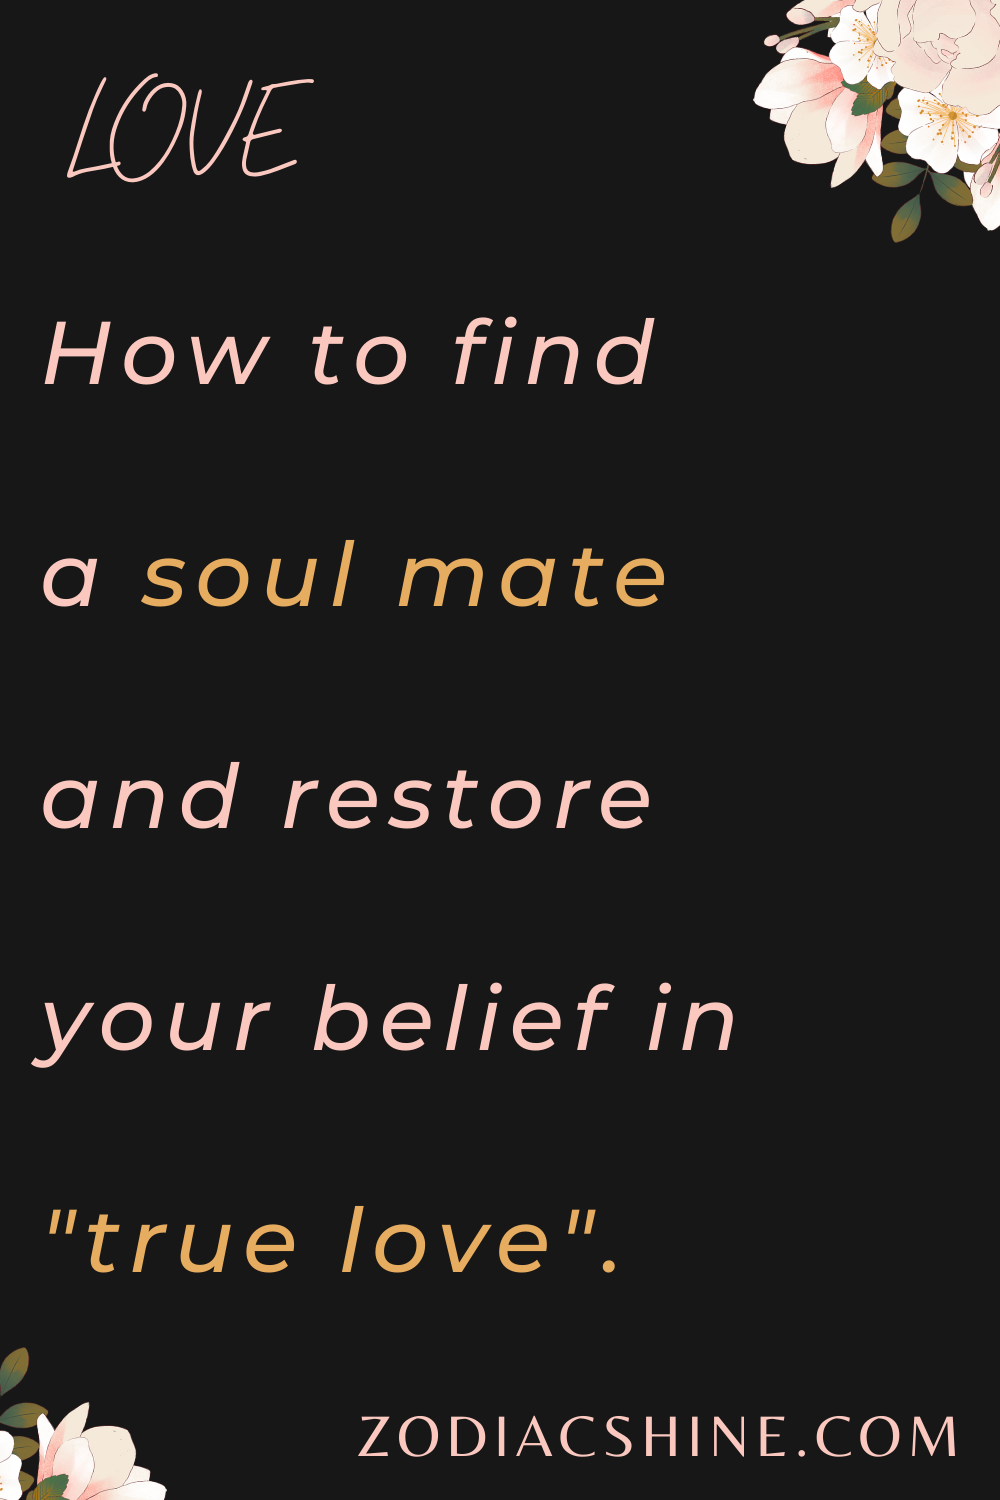 How to find a soul mate and restore your belief in "true love".